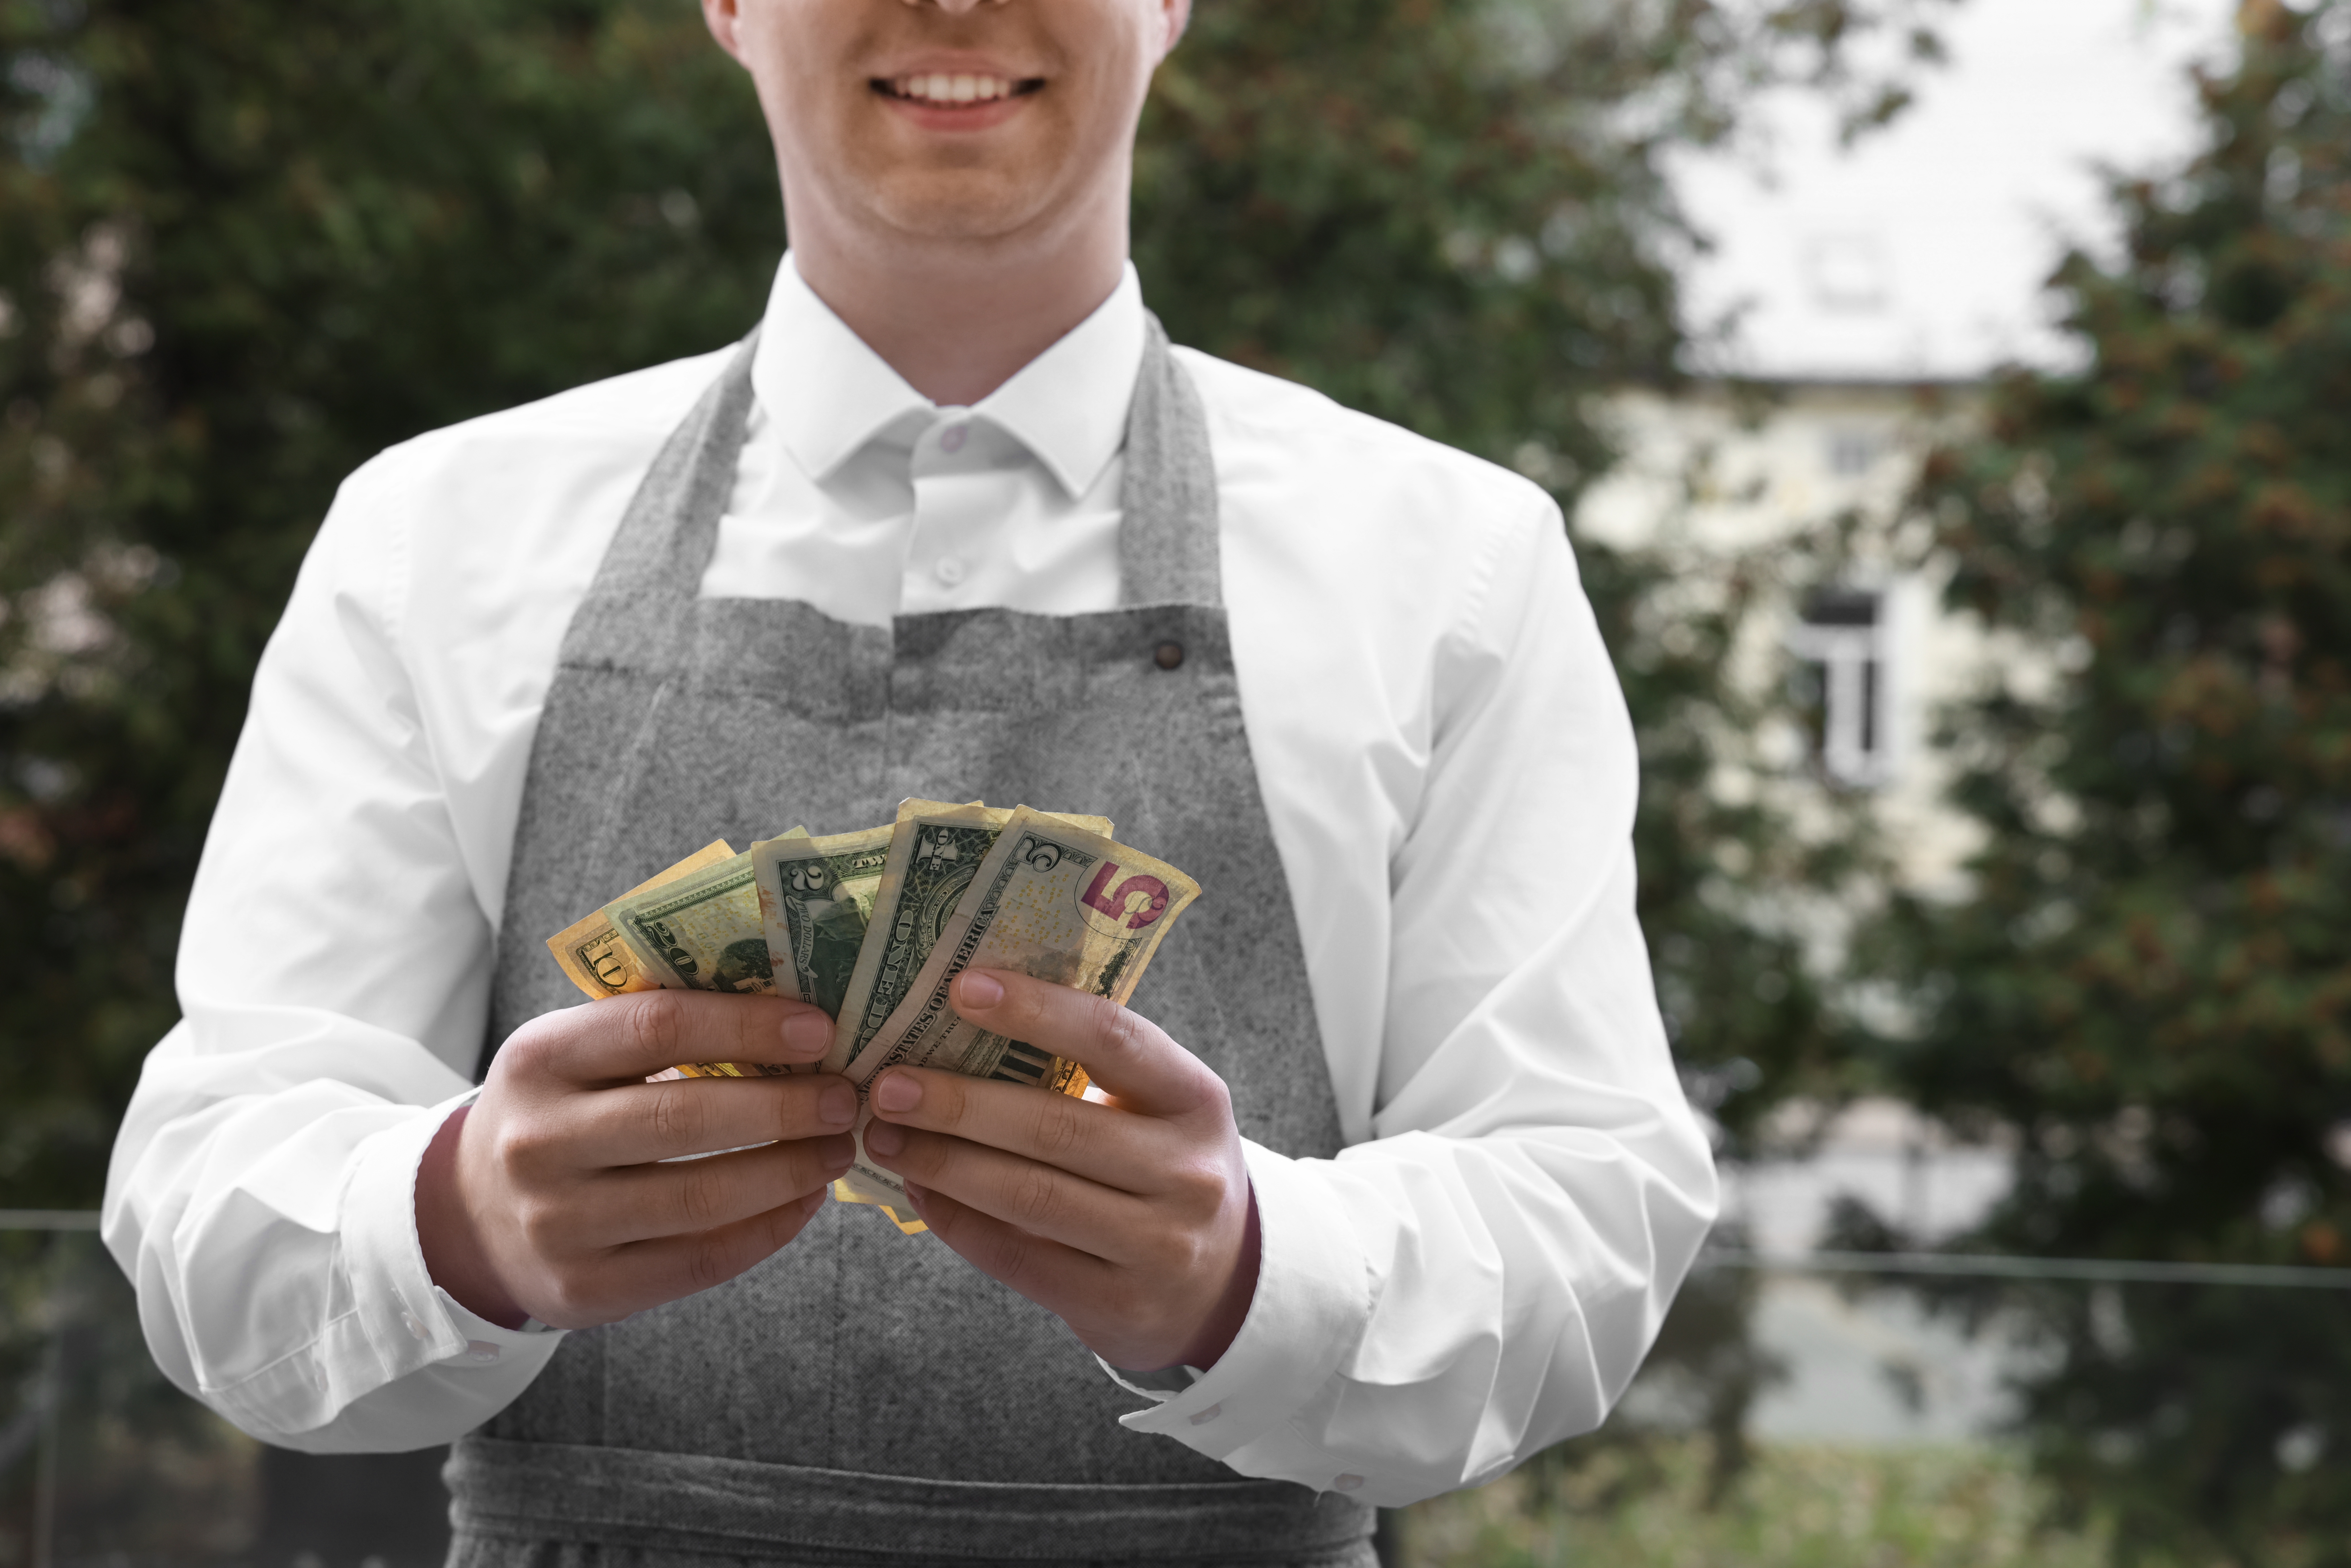 Waiter with tips | Source: Shutterstock